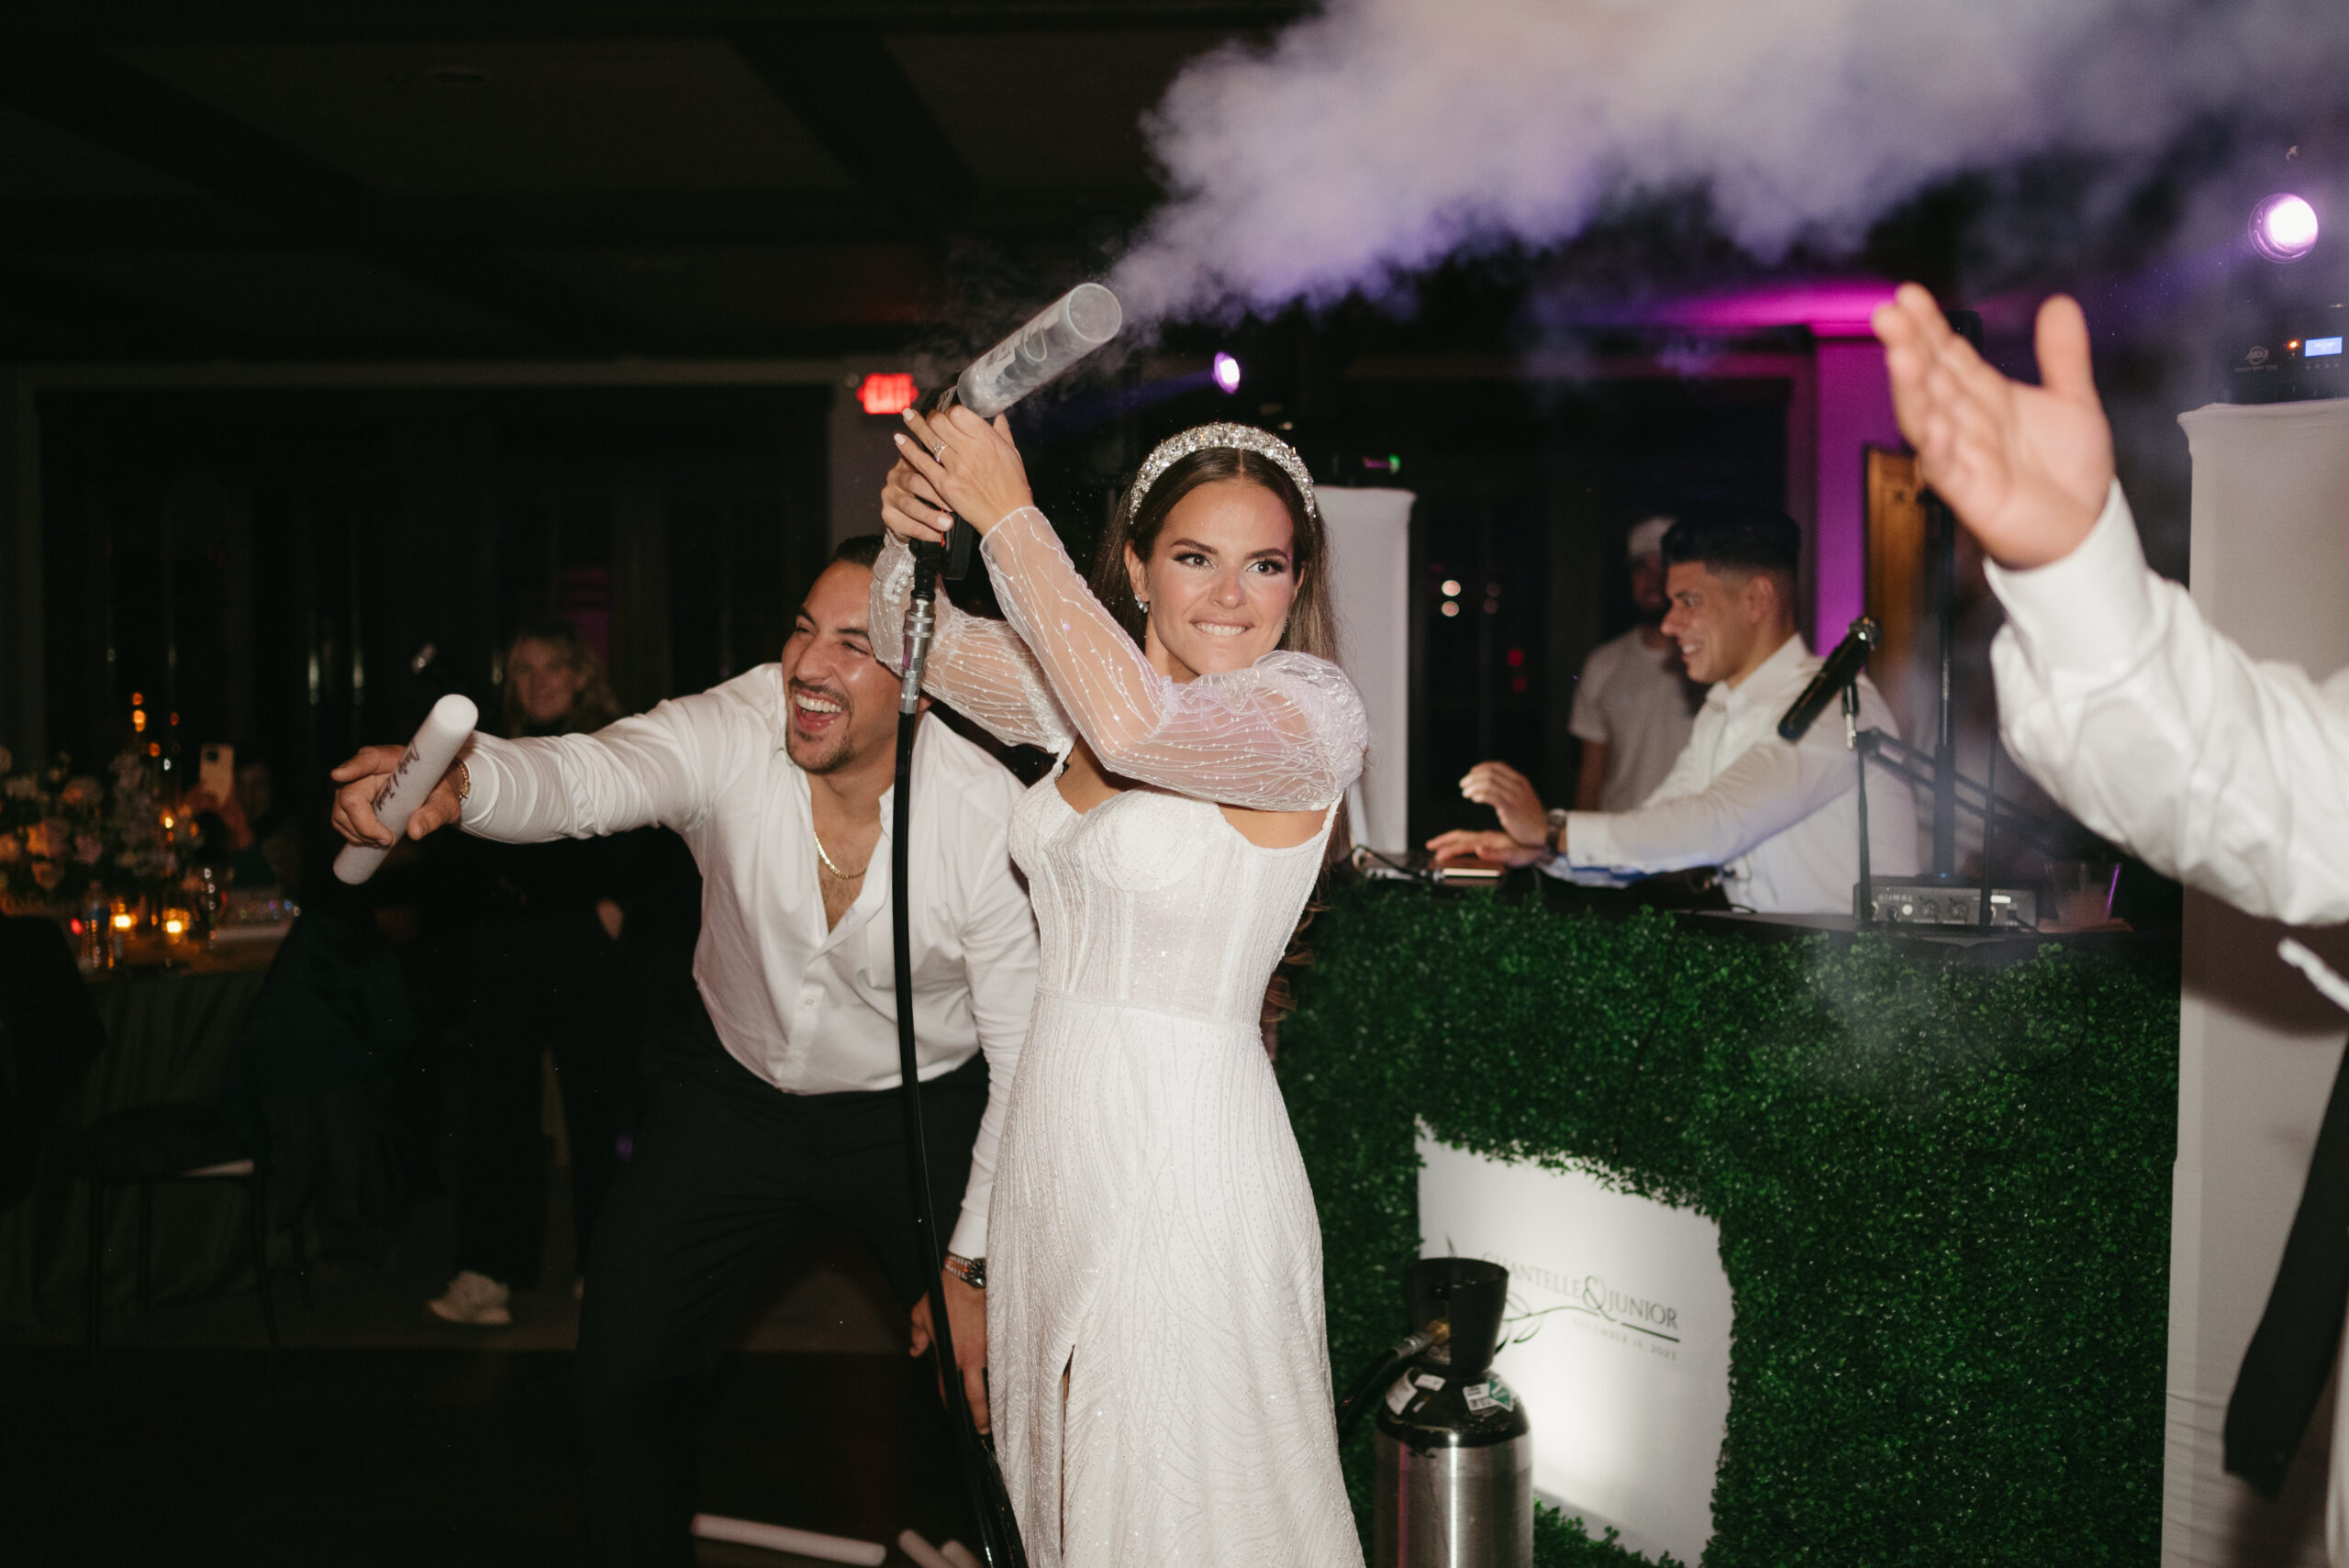 Wedding reception with CO2 guns for the party | Megan Kuhn Photography